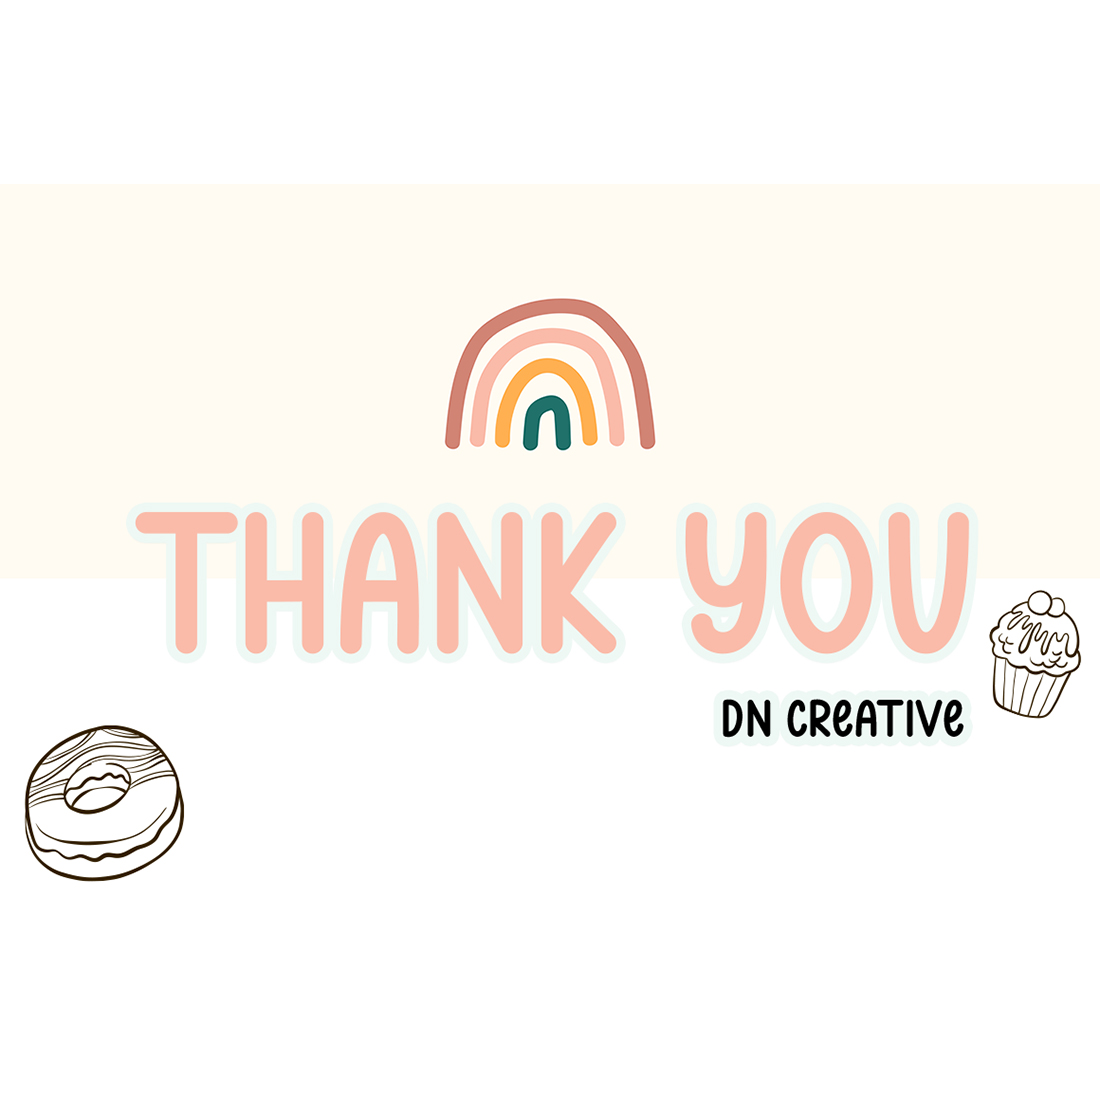 Thank you card with donuts and a rainbow.